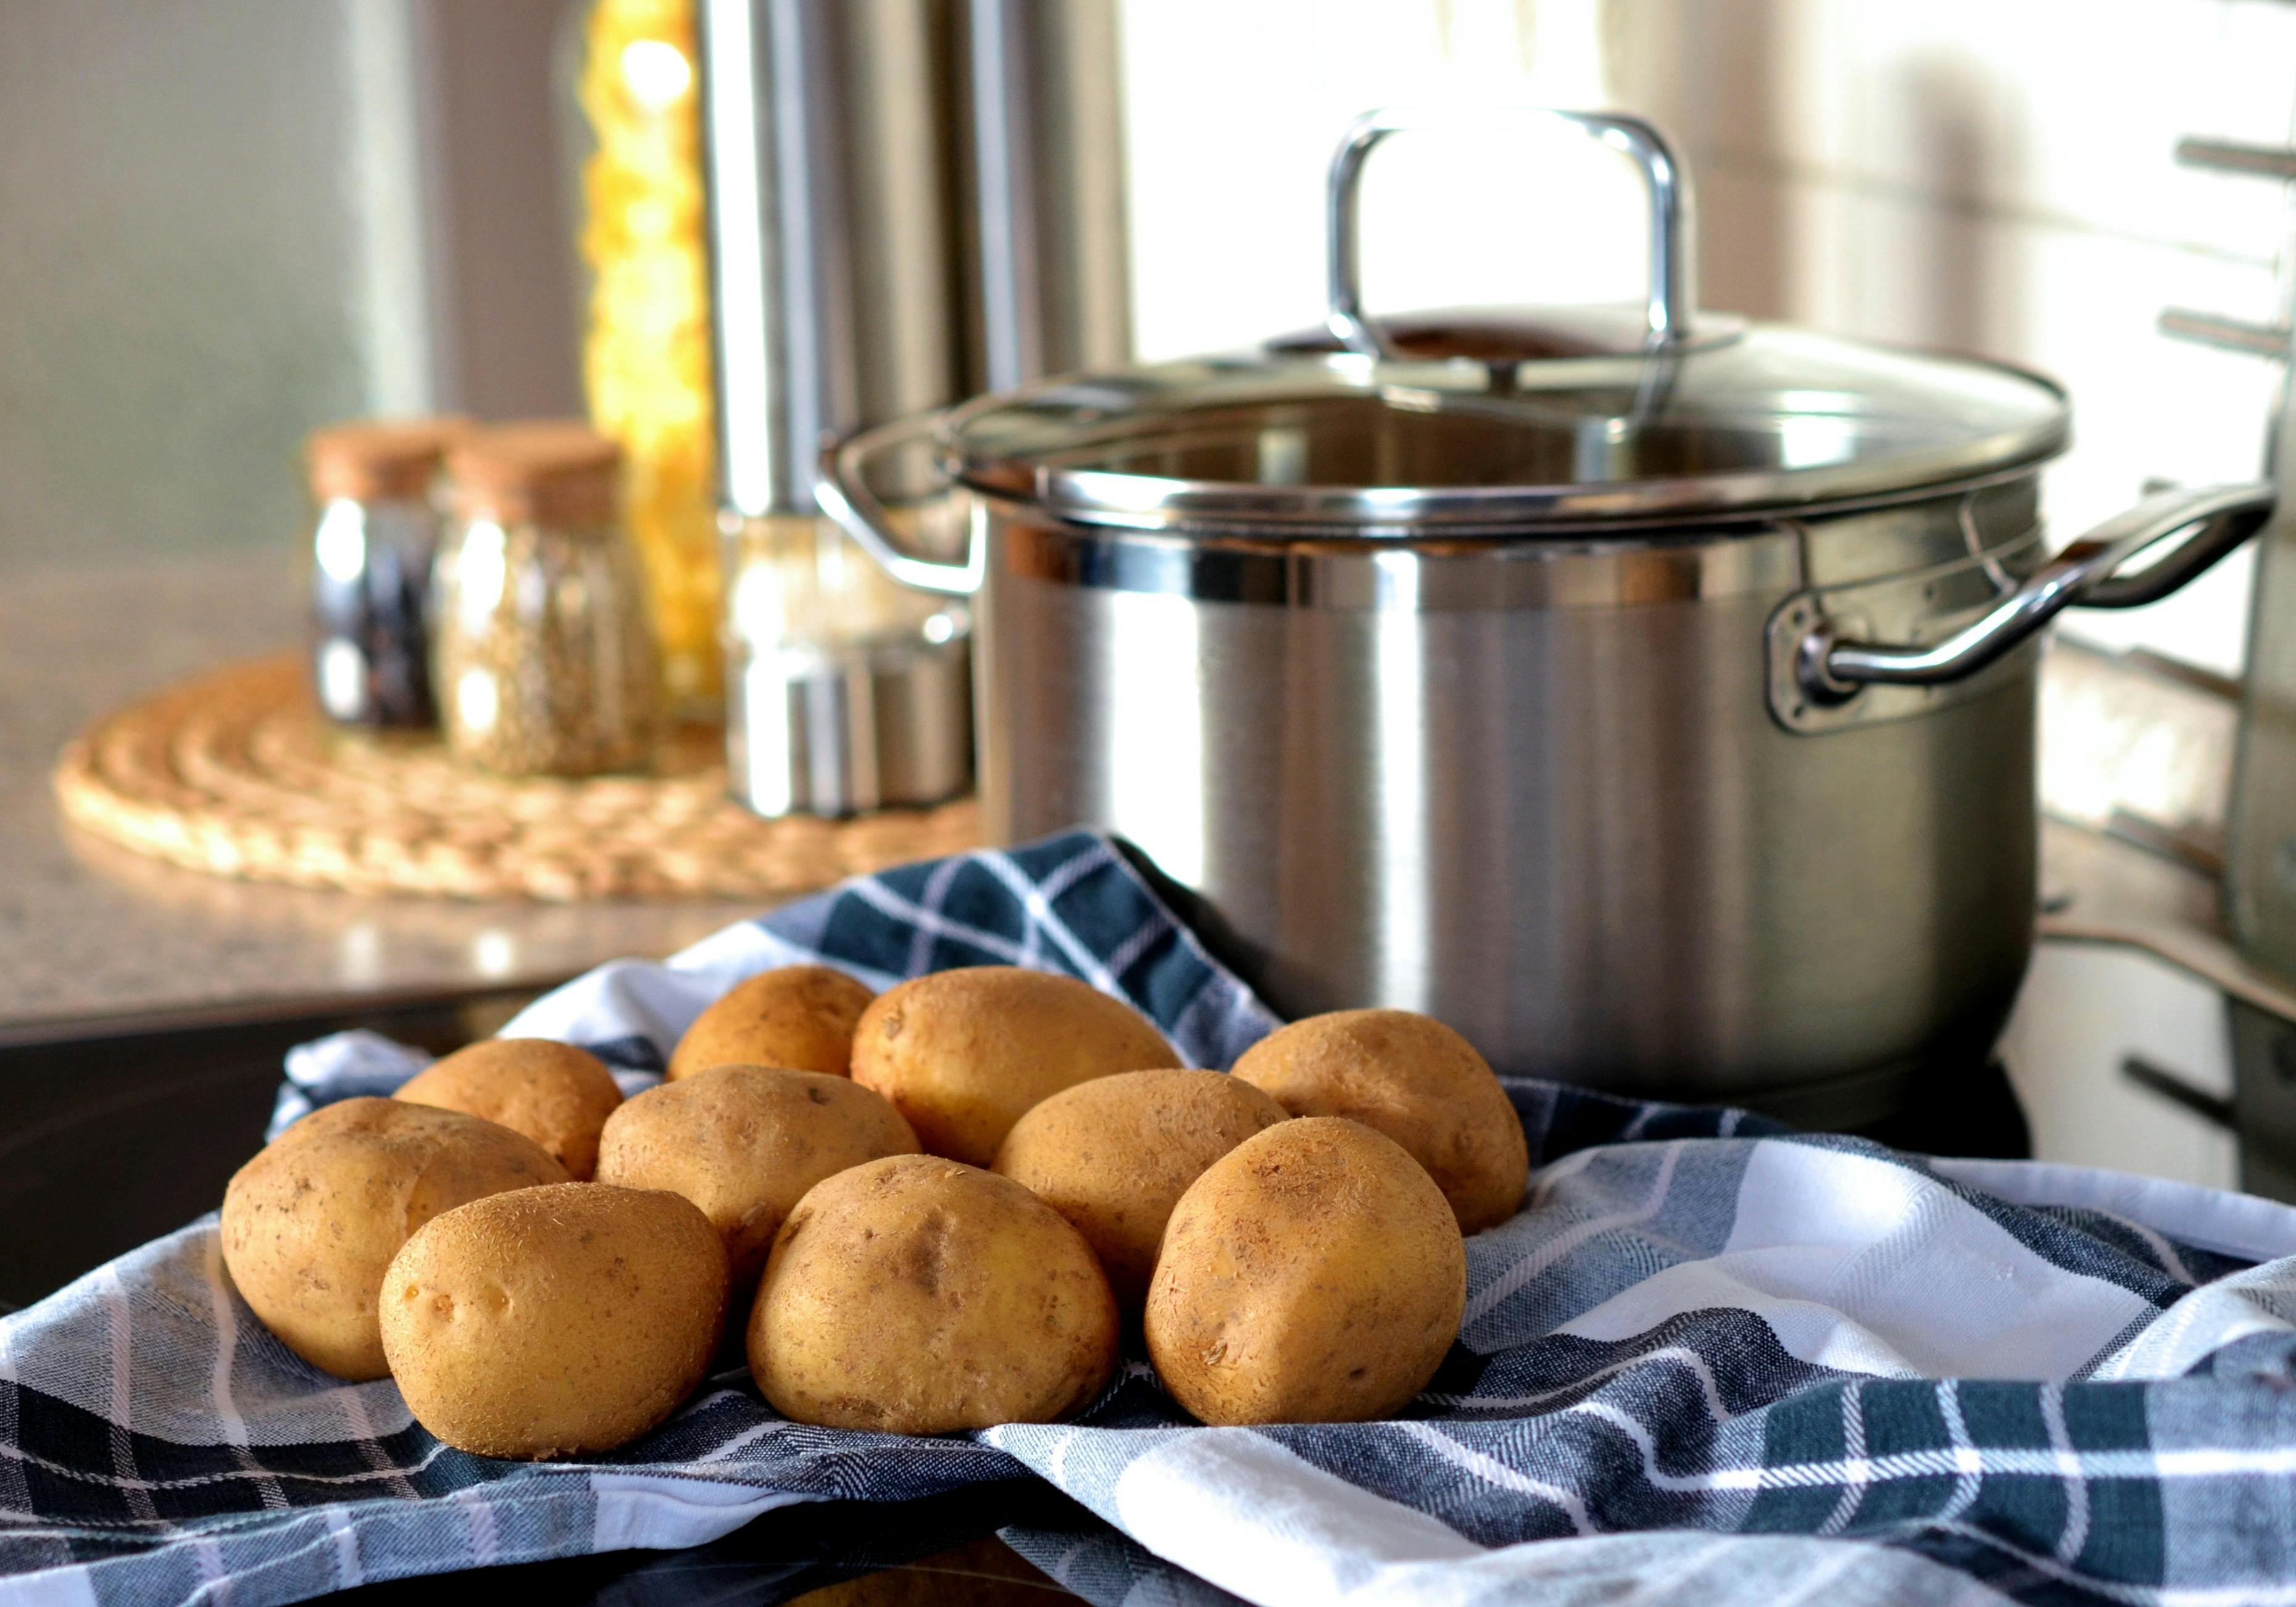 Potatoes next to a stainless steel cooking pot.. | Photo: Pexels